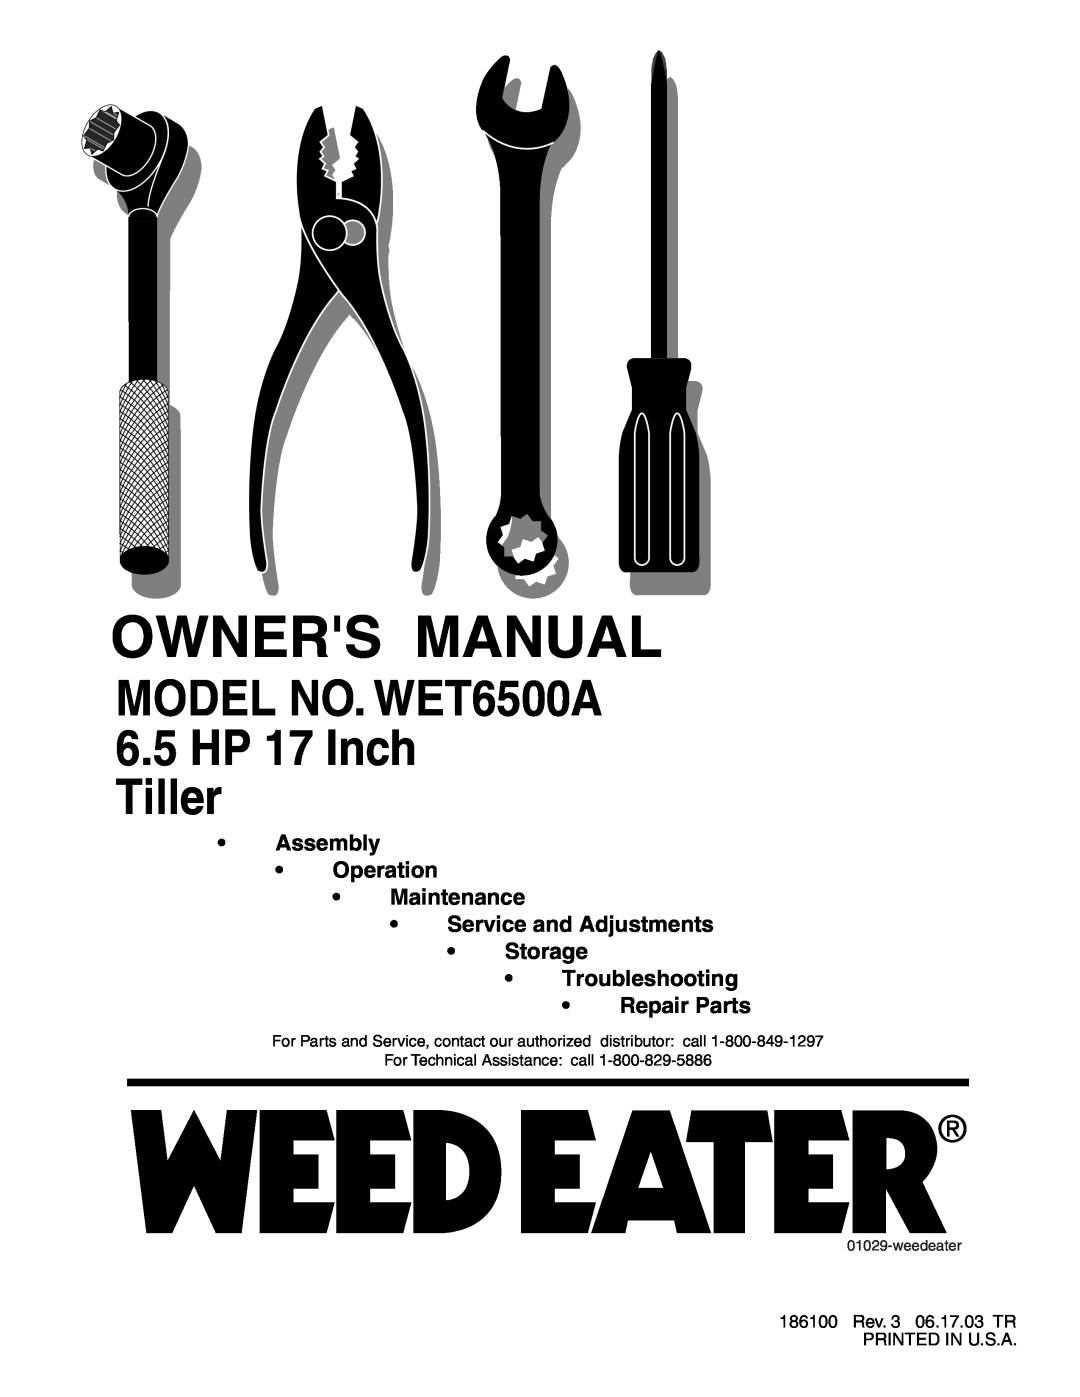 Weed Eater 186100 owner manual MODEL NO. WET6500A 6.5 HP 17 Inch Tiller, Troubleshooting Repair Parts, weedeater 